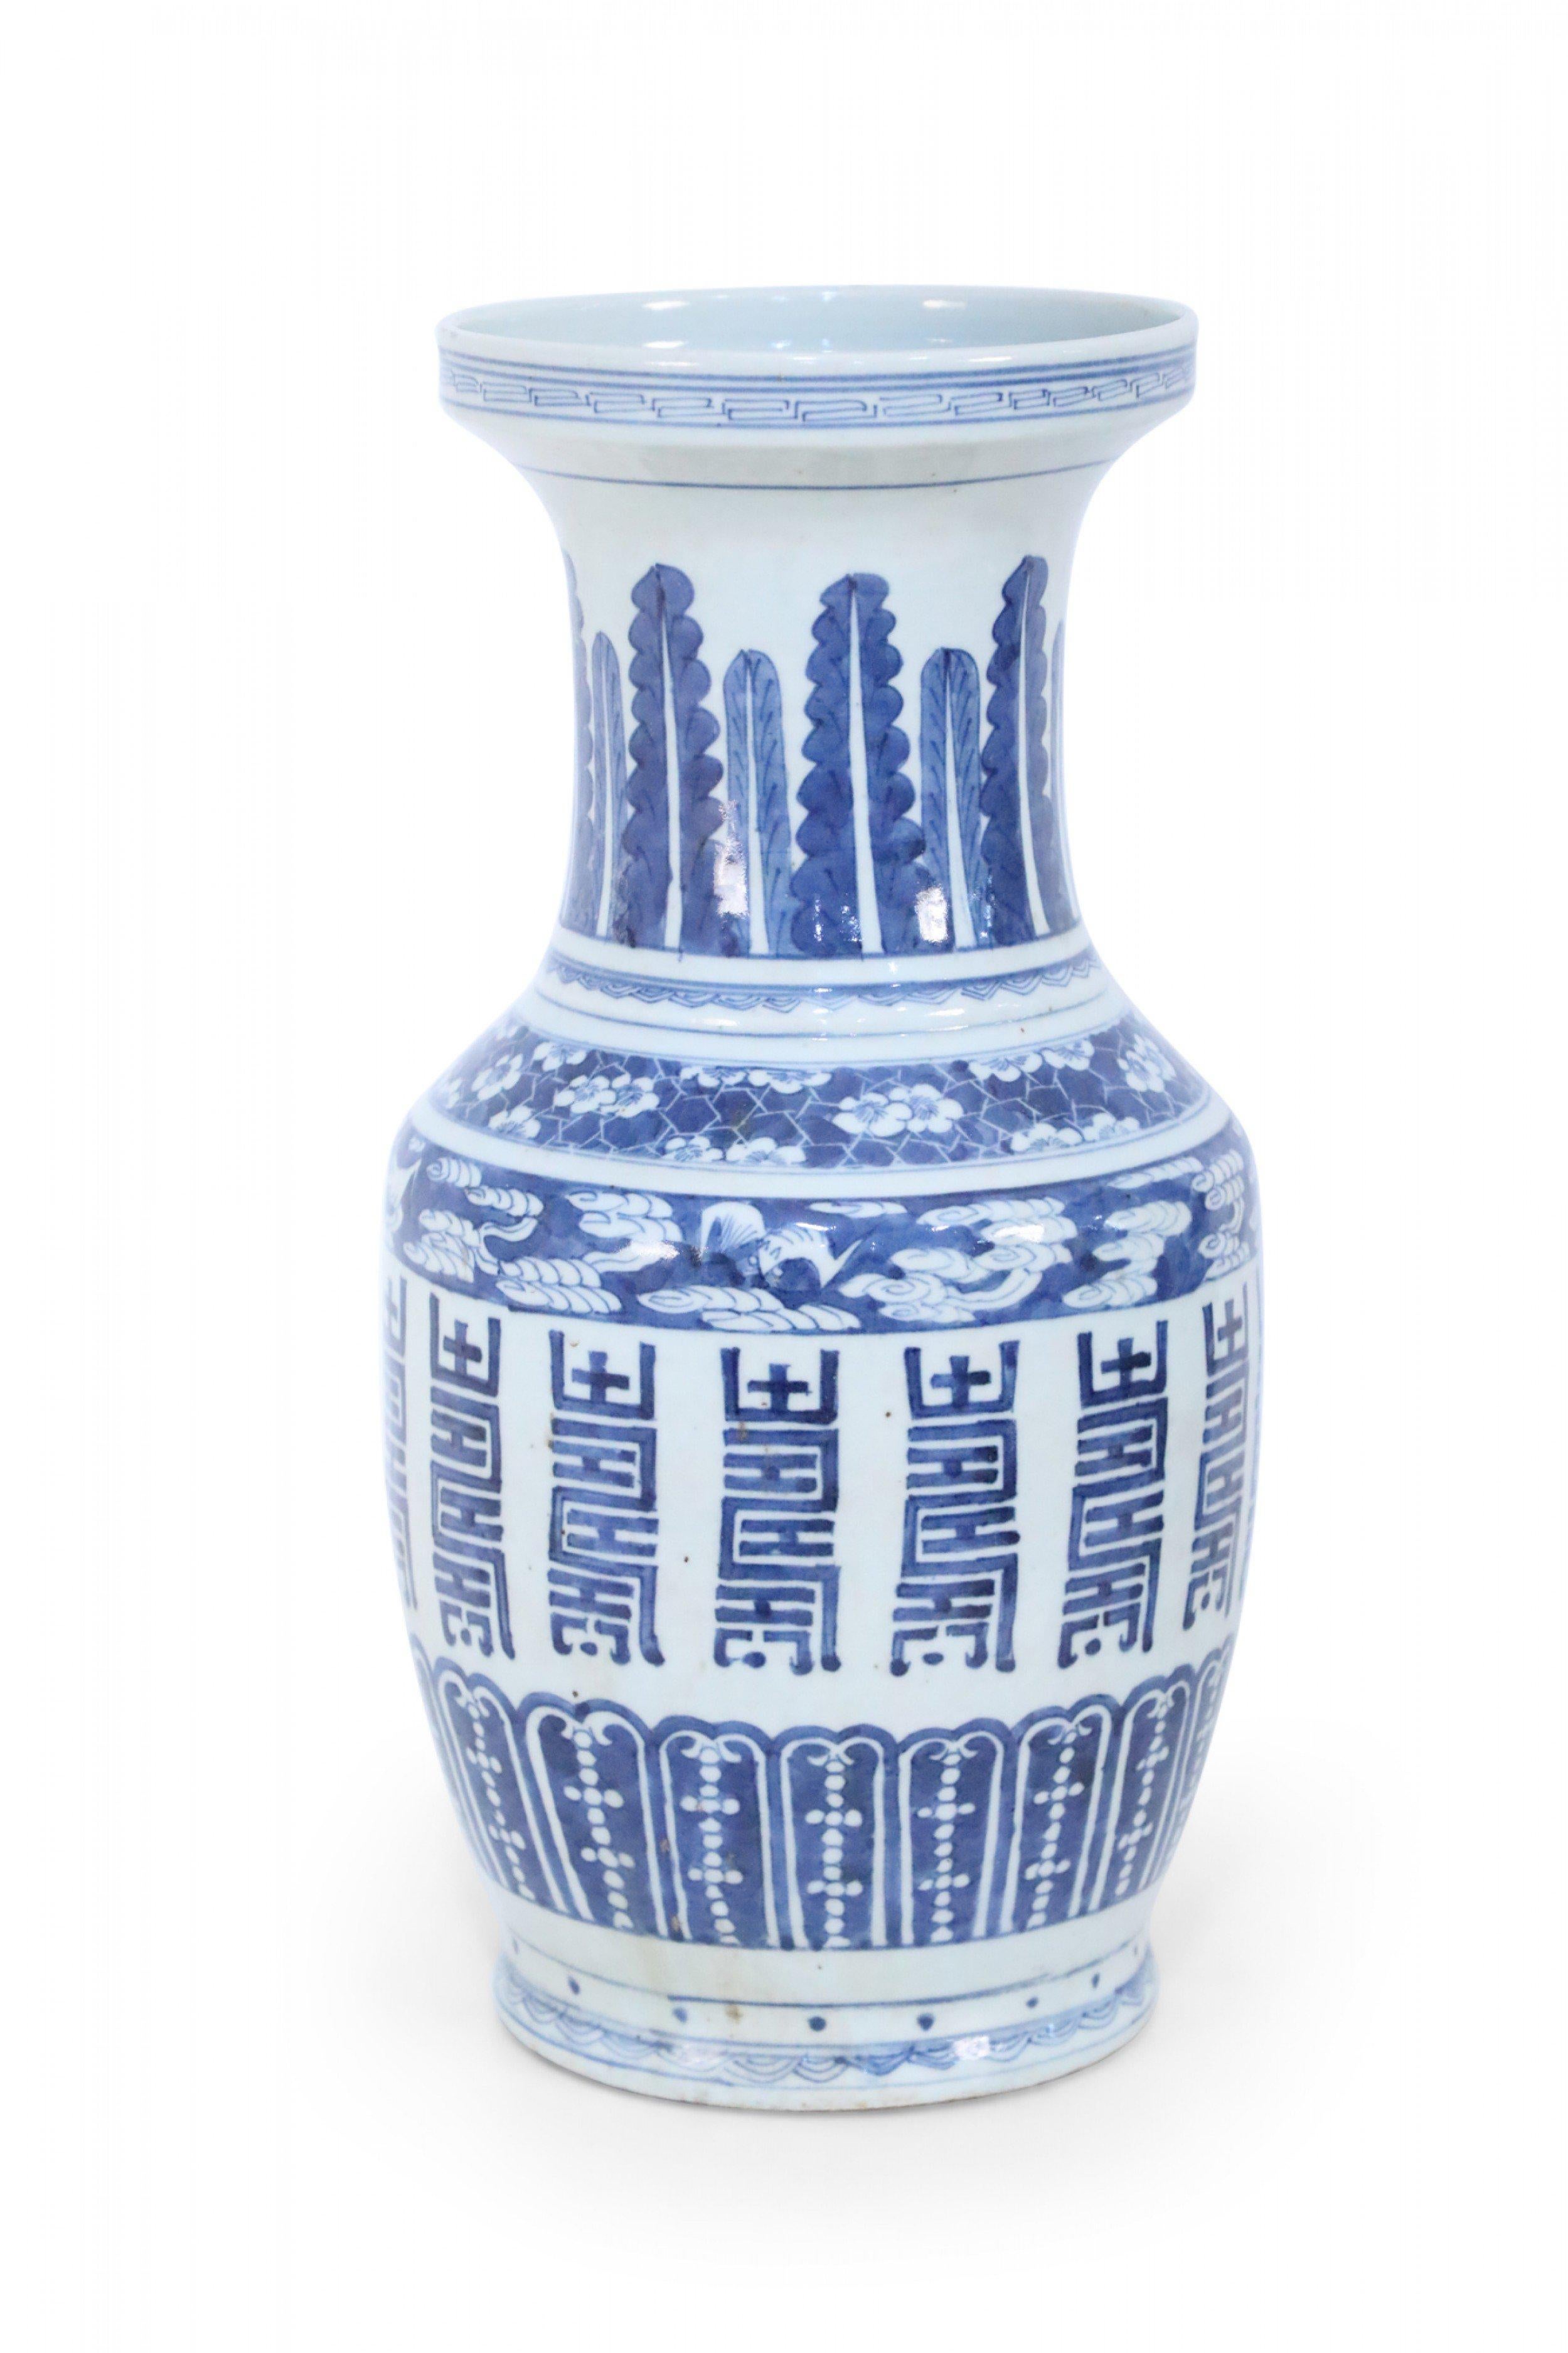 Chinese white porcelain urn painted with a variety of blue, decorative patterns, including feathers and bold vertical markings, that are proportionally balanced to create a harmonious design.
     